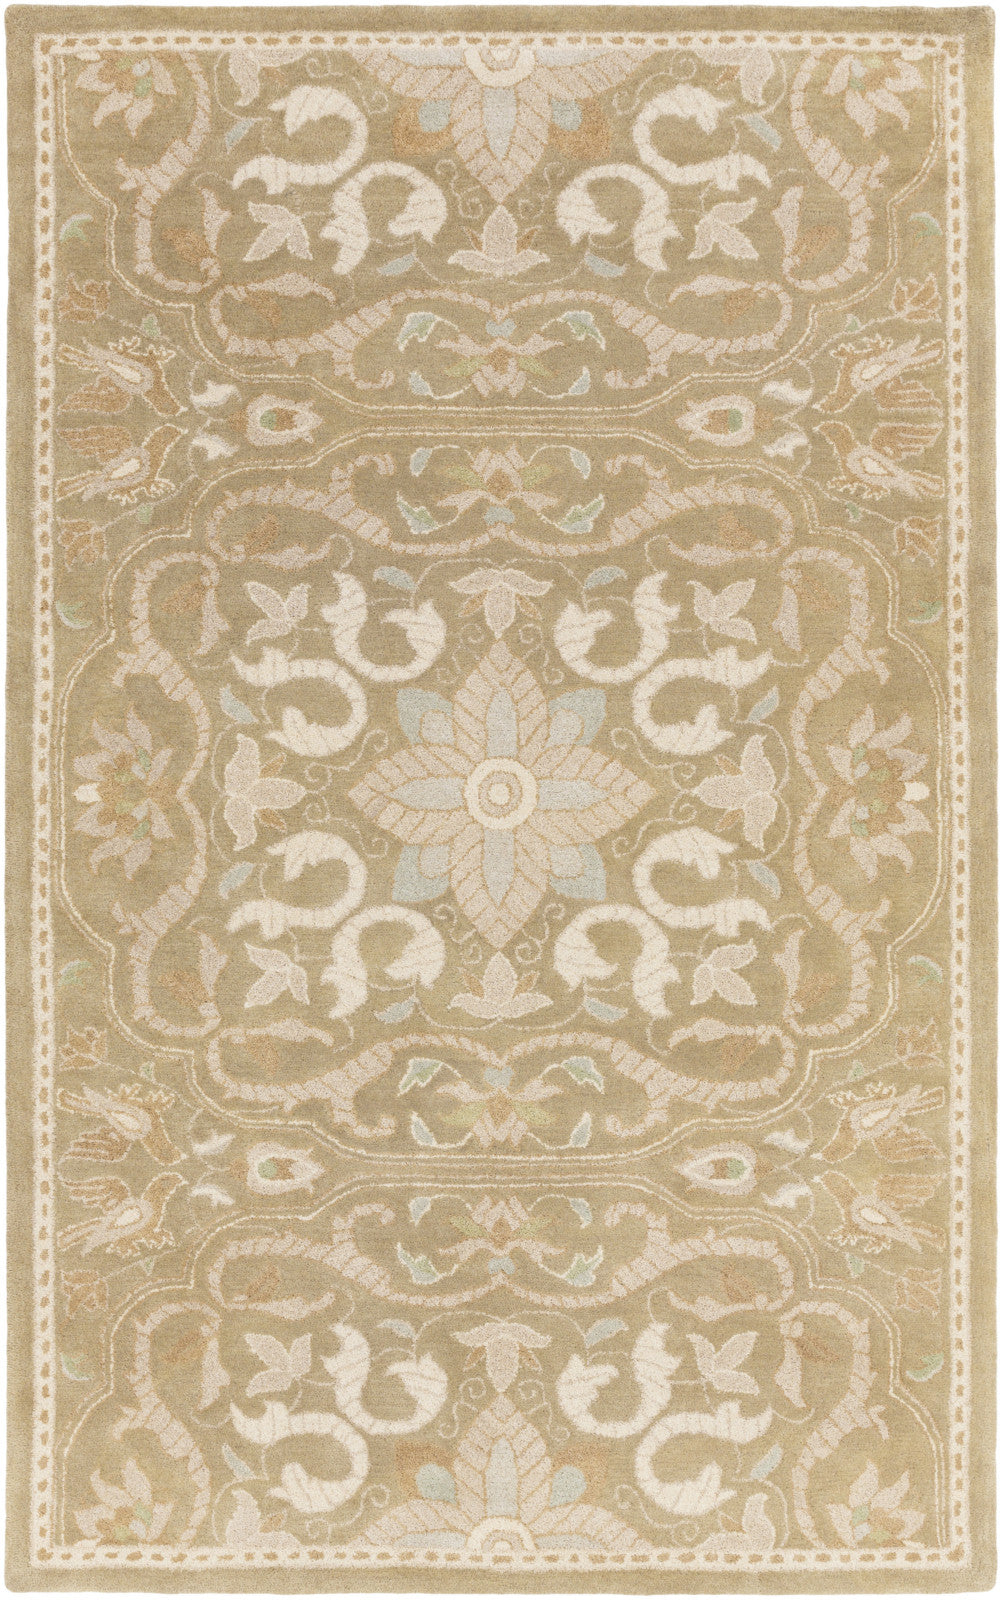 Surya SMI-2164 Brown Hand Tufted Area Rug by Smithsonian